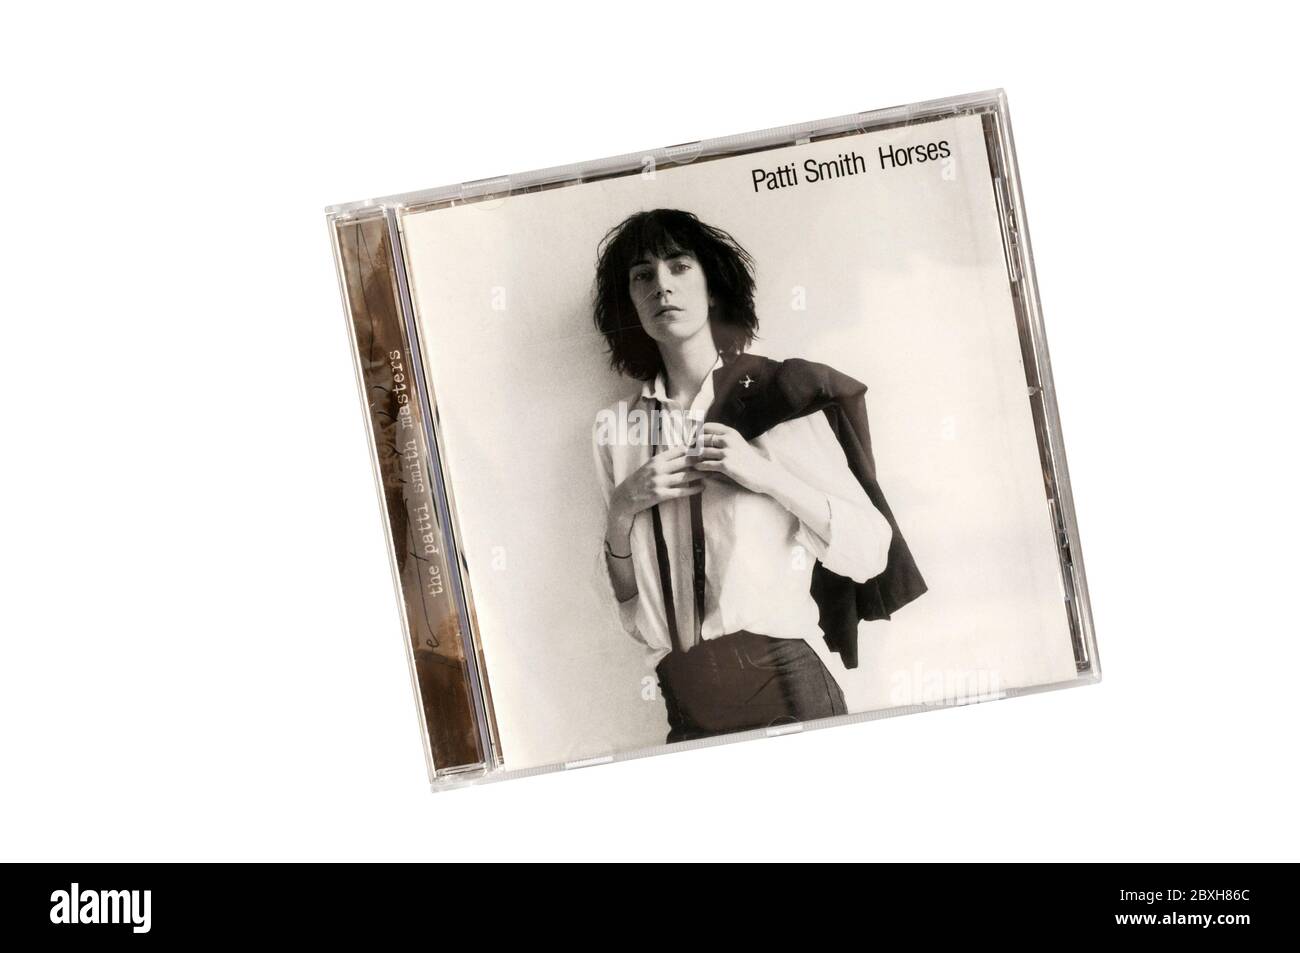 The Patti Smith Masters edition of Horses, her debut studio album first released in 1975. Stock Photo